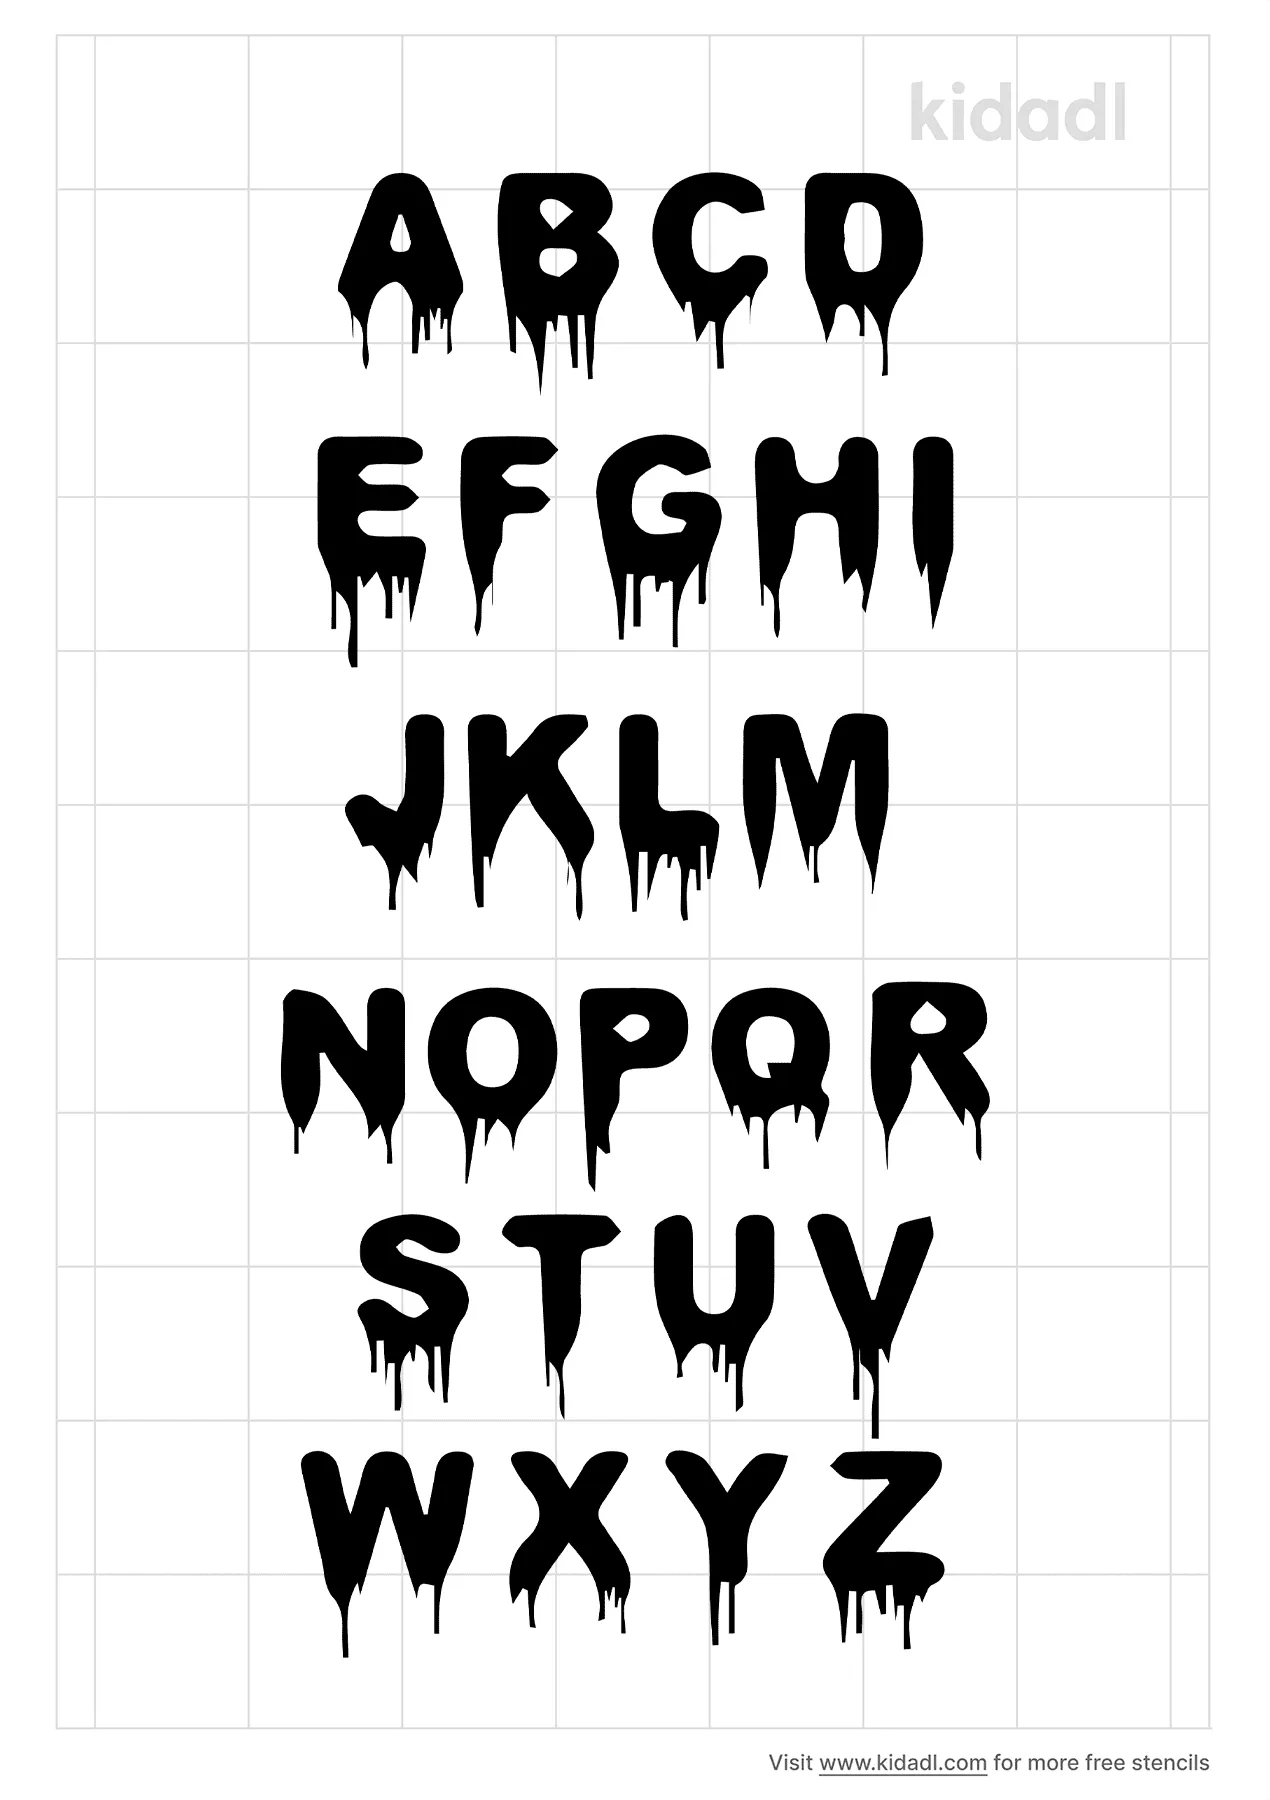 gothic s stencils free printable letters stencils kidadl and letters stencils free printable stencils kidadl